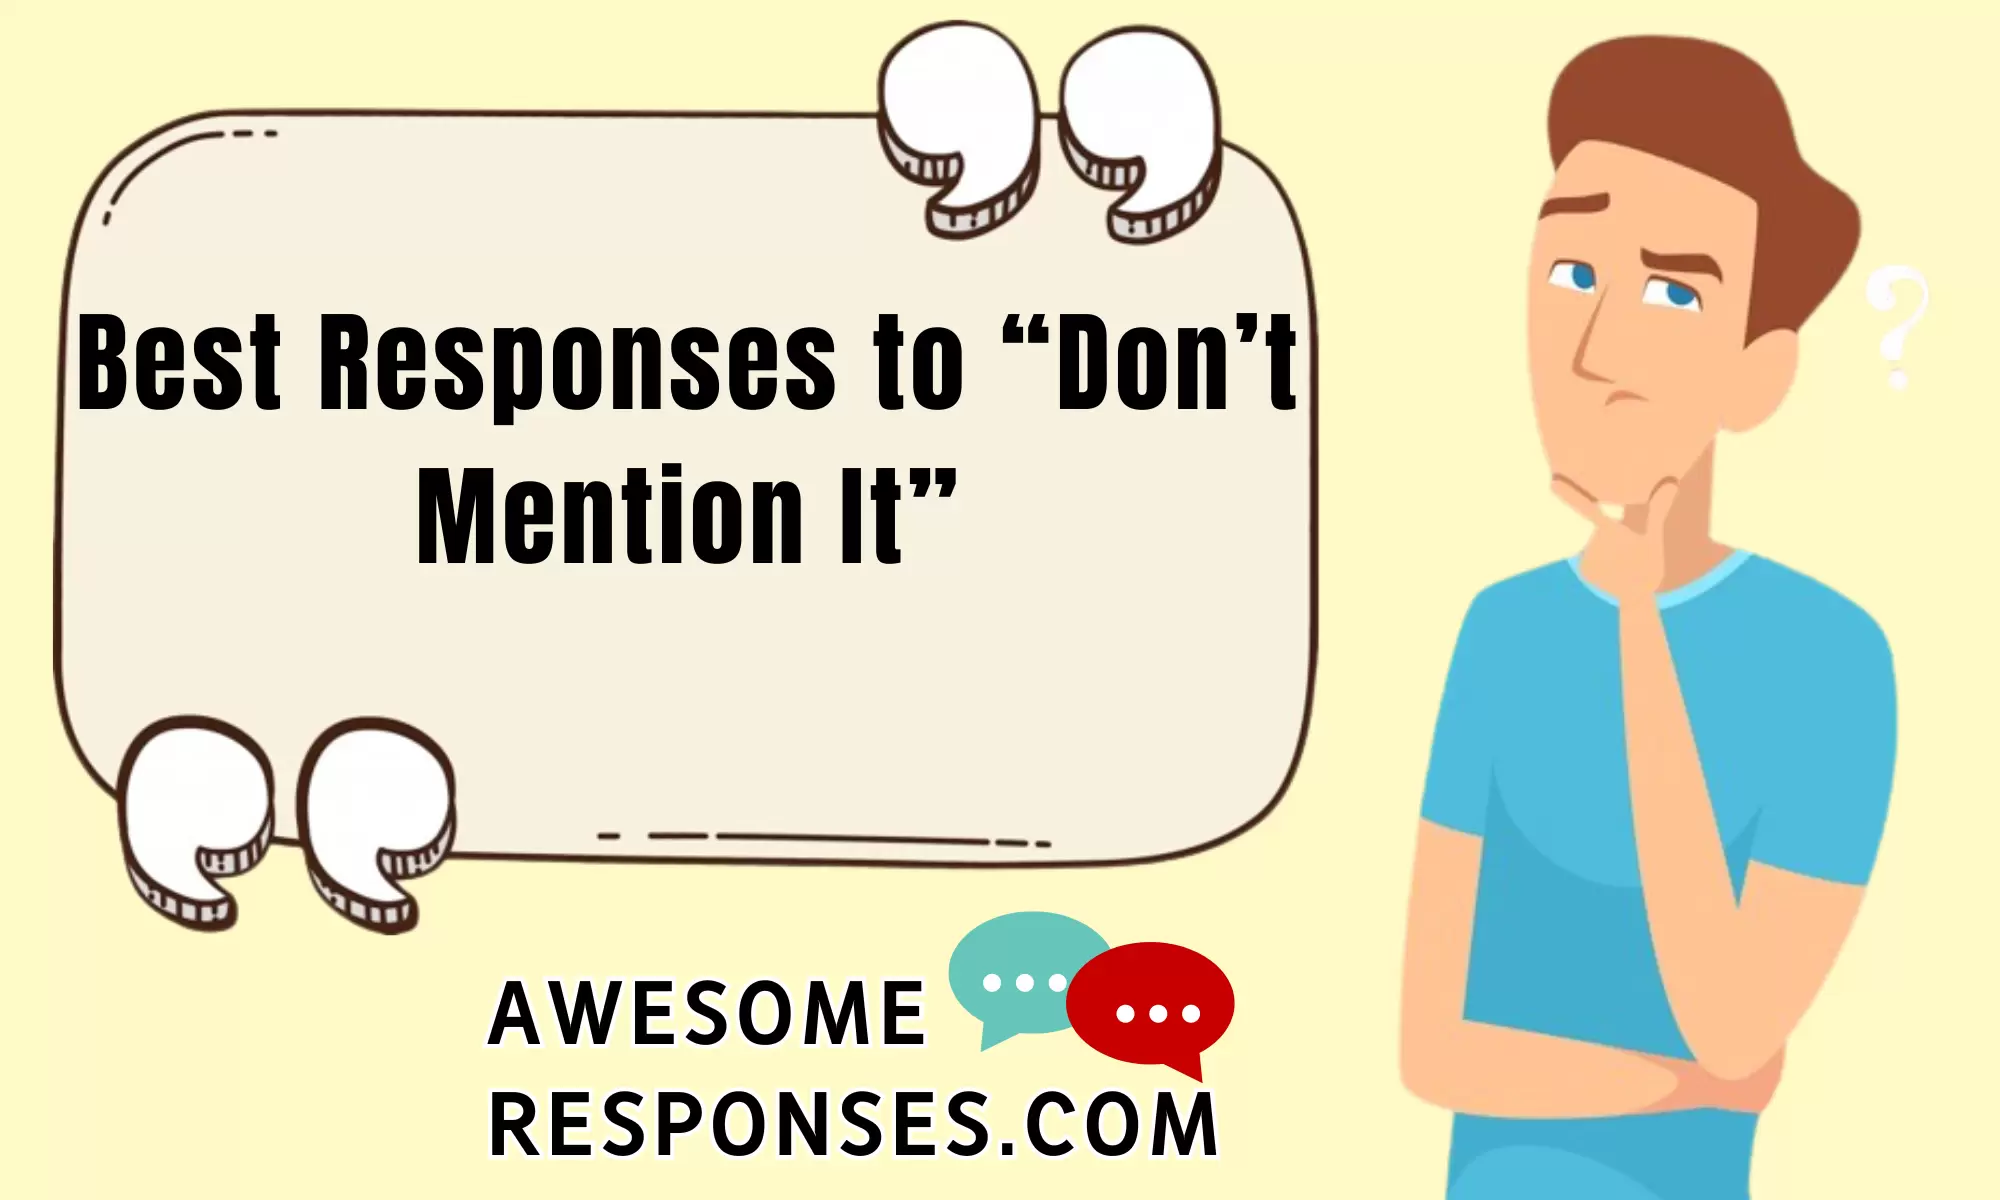 Best Responses to “Don’t Mention It”